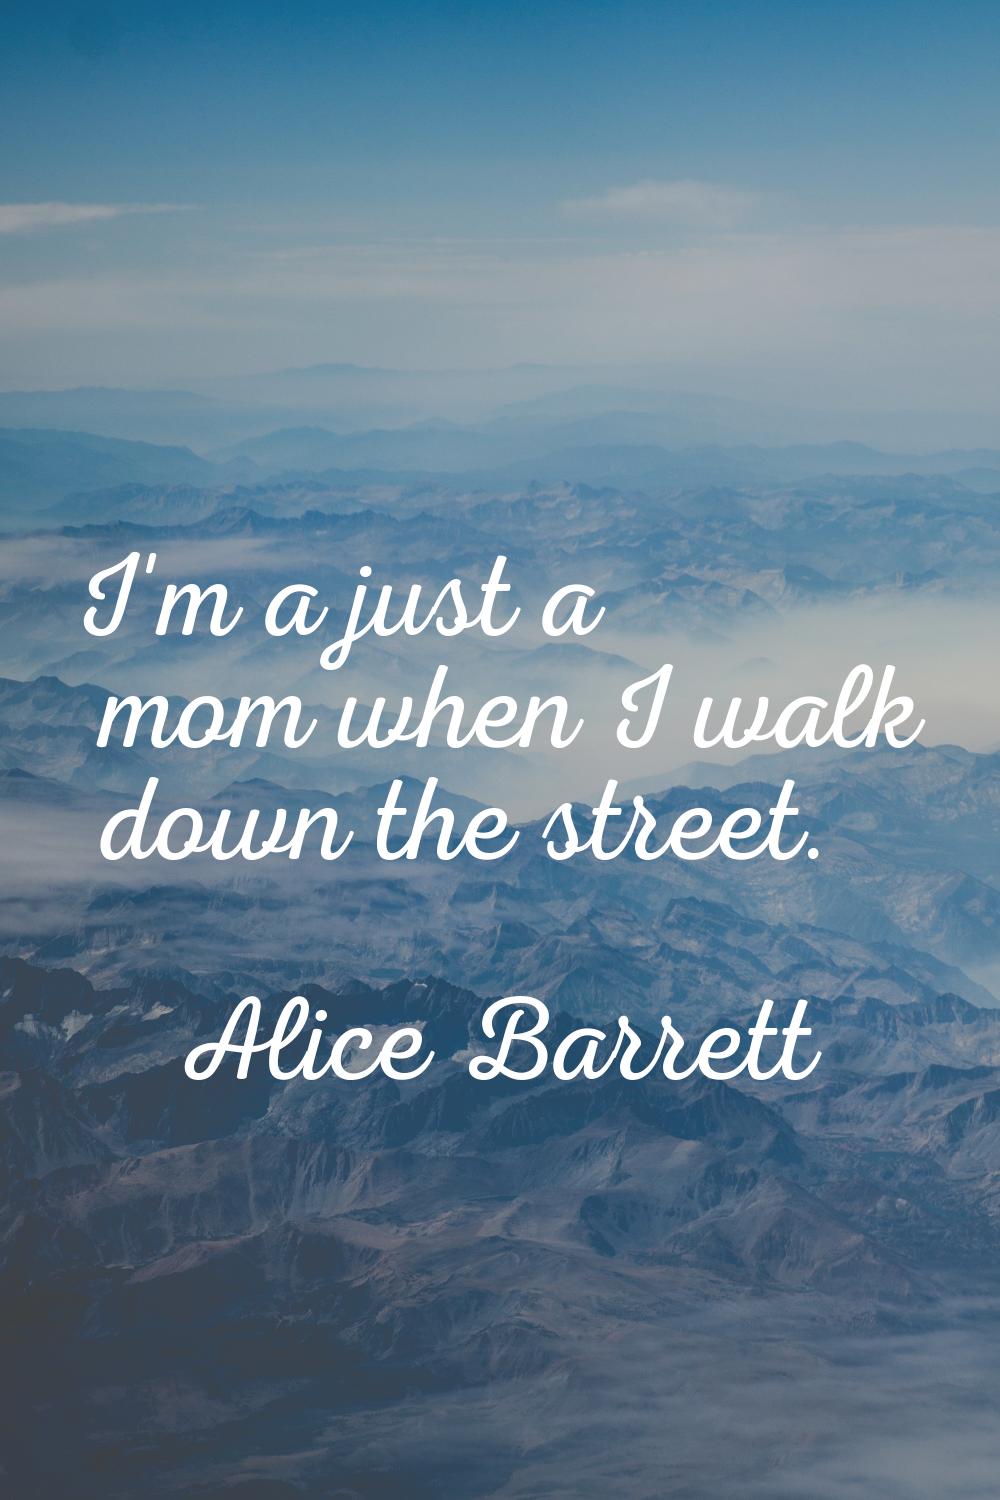 I'm a just a mom when I walk down the street.